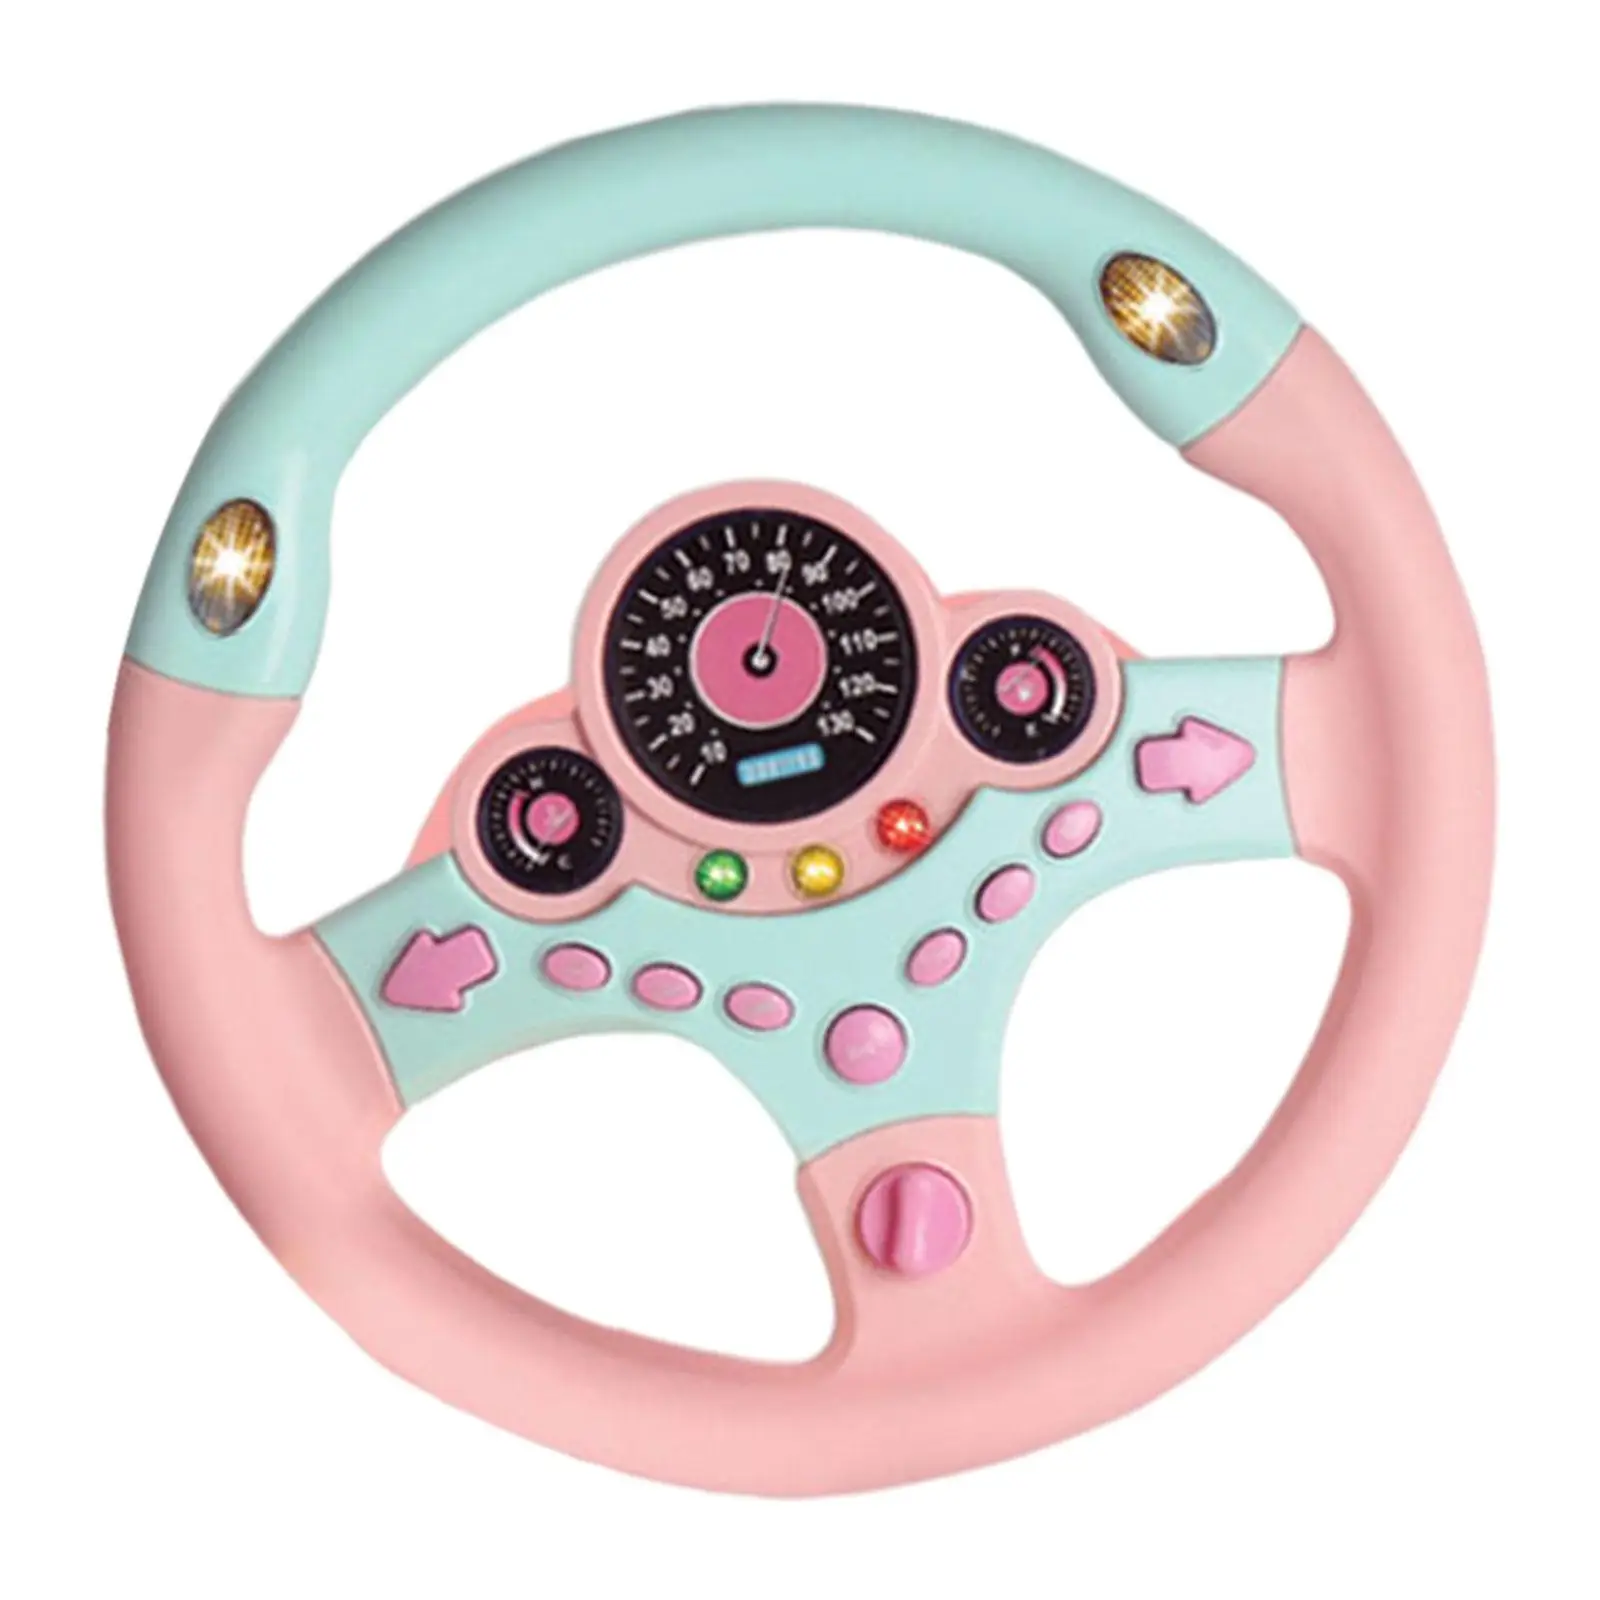 Simulated Driving Steering Wheel Copilot Toy with Music for Infant Toddler